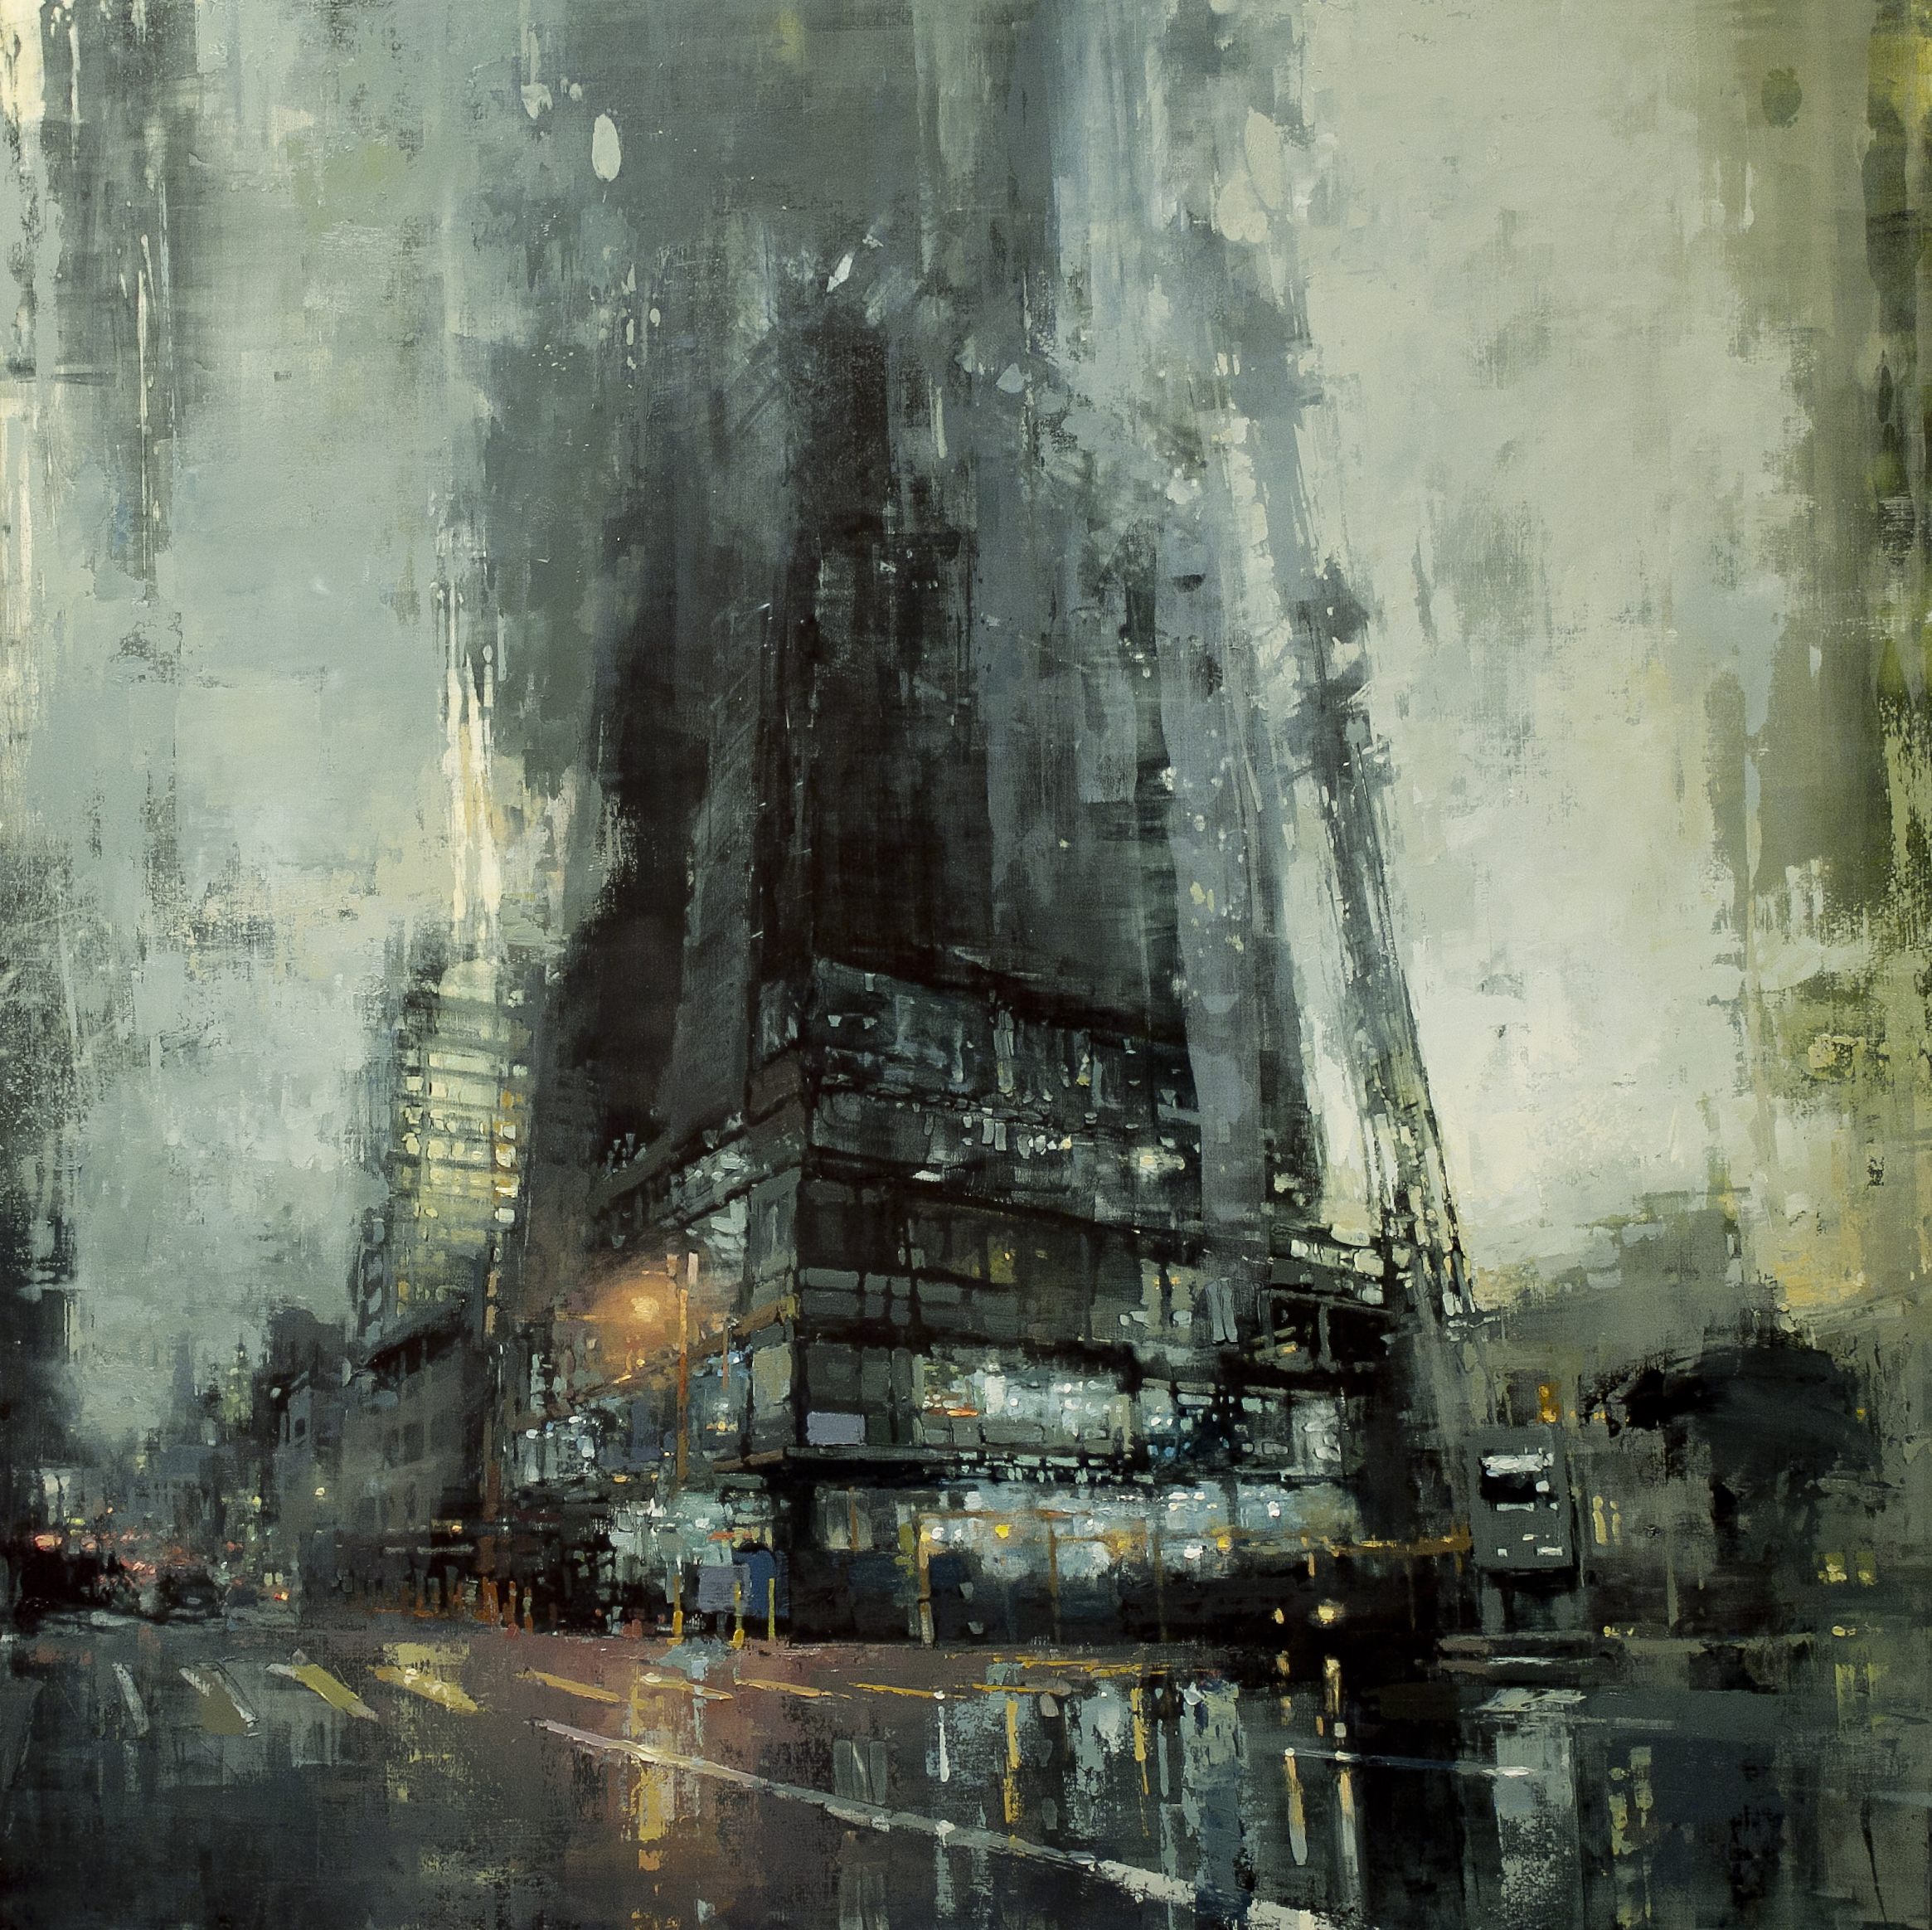 Jeremy Mann, "Construction #3," 36 x 36 inches, Oil on panel, 2011, Sold through the Principle Gallery